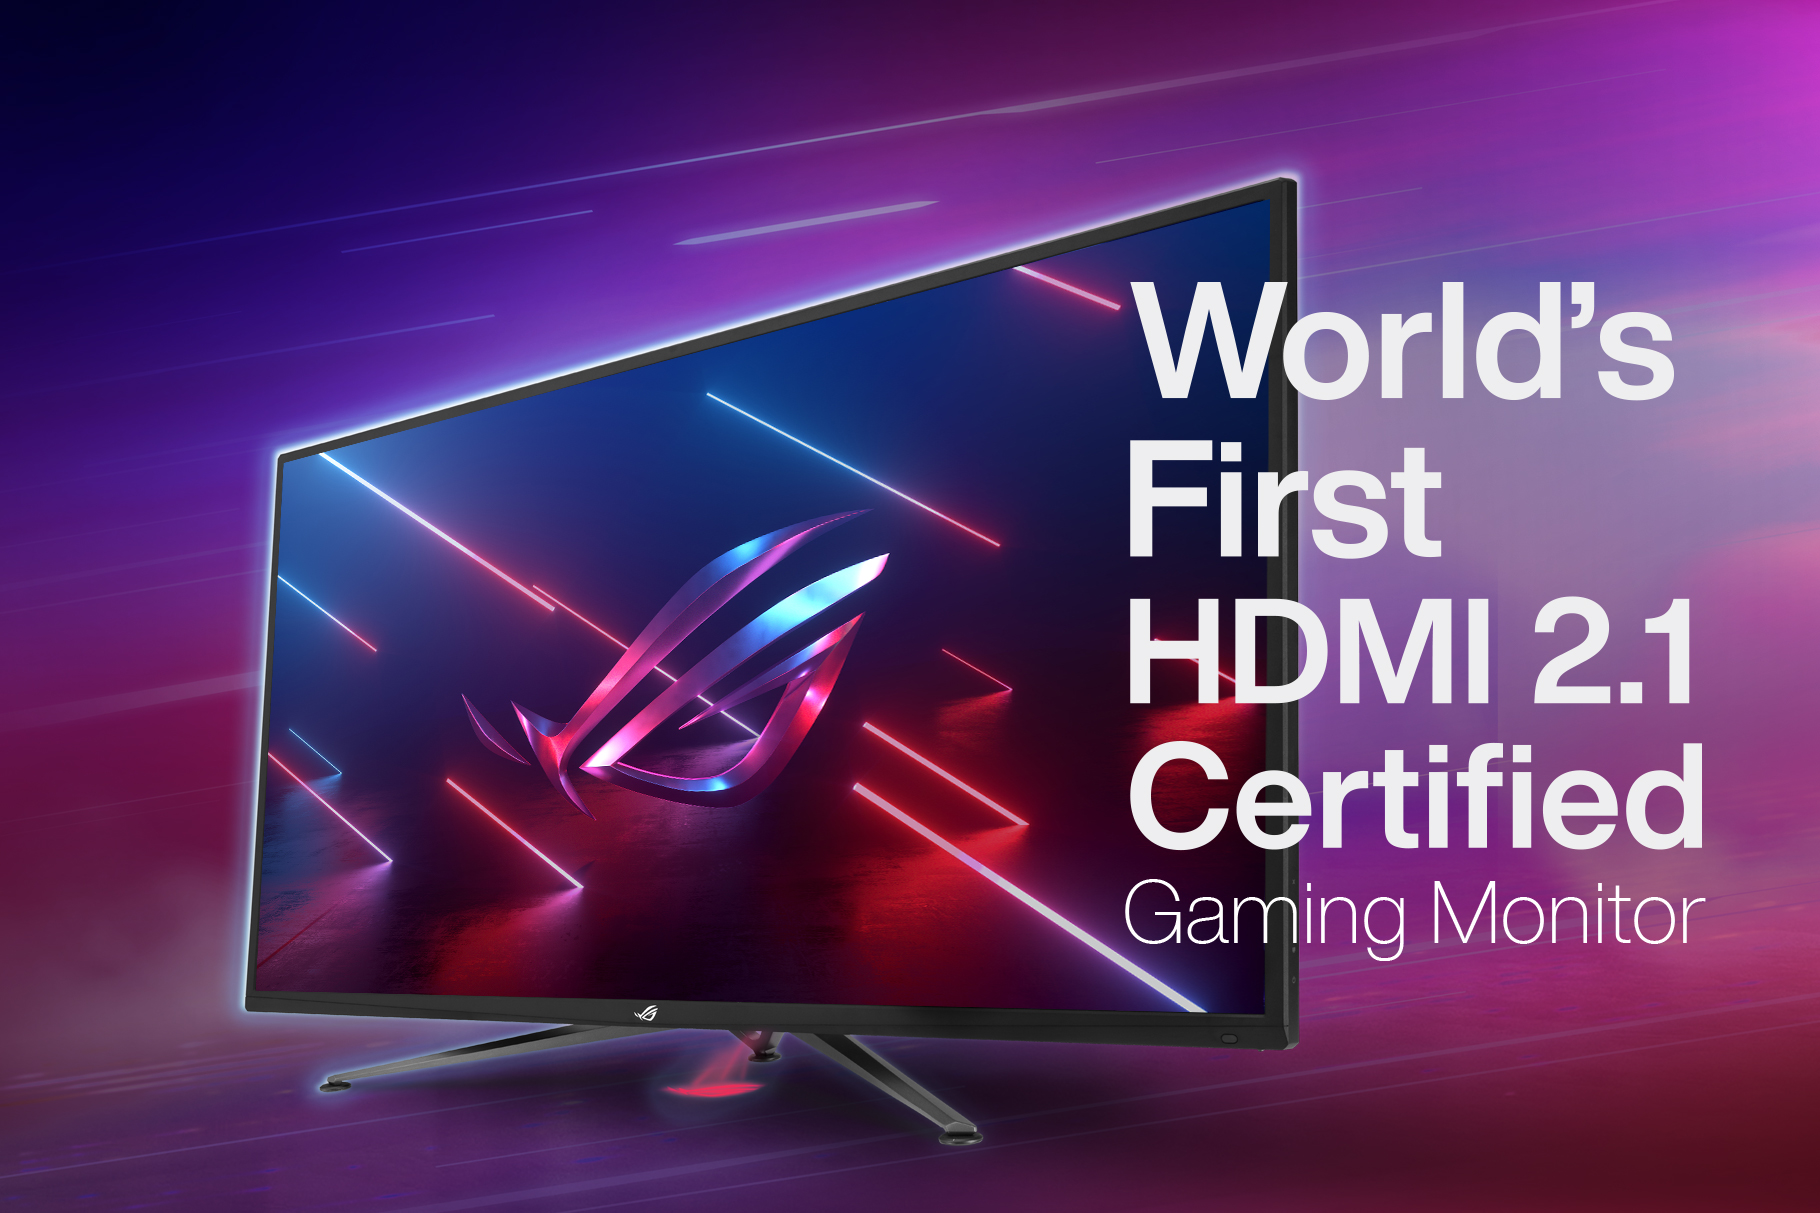 ASUS ROG announces world's first HDMI 2.1-certified 4K 120Hz